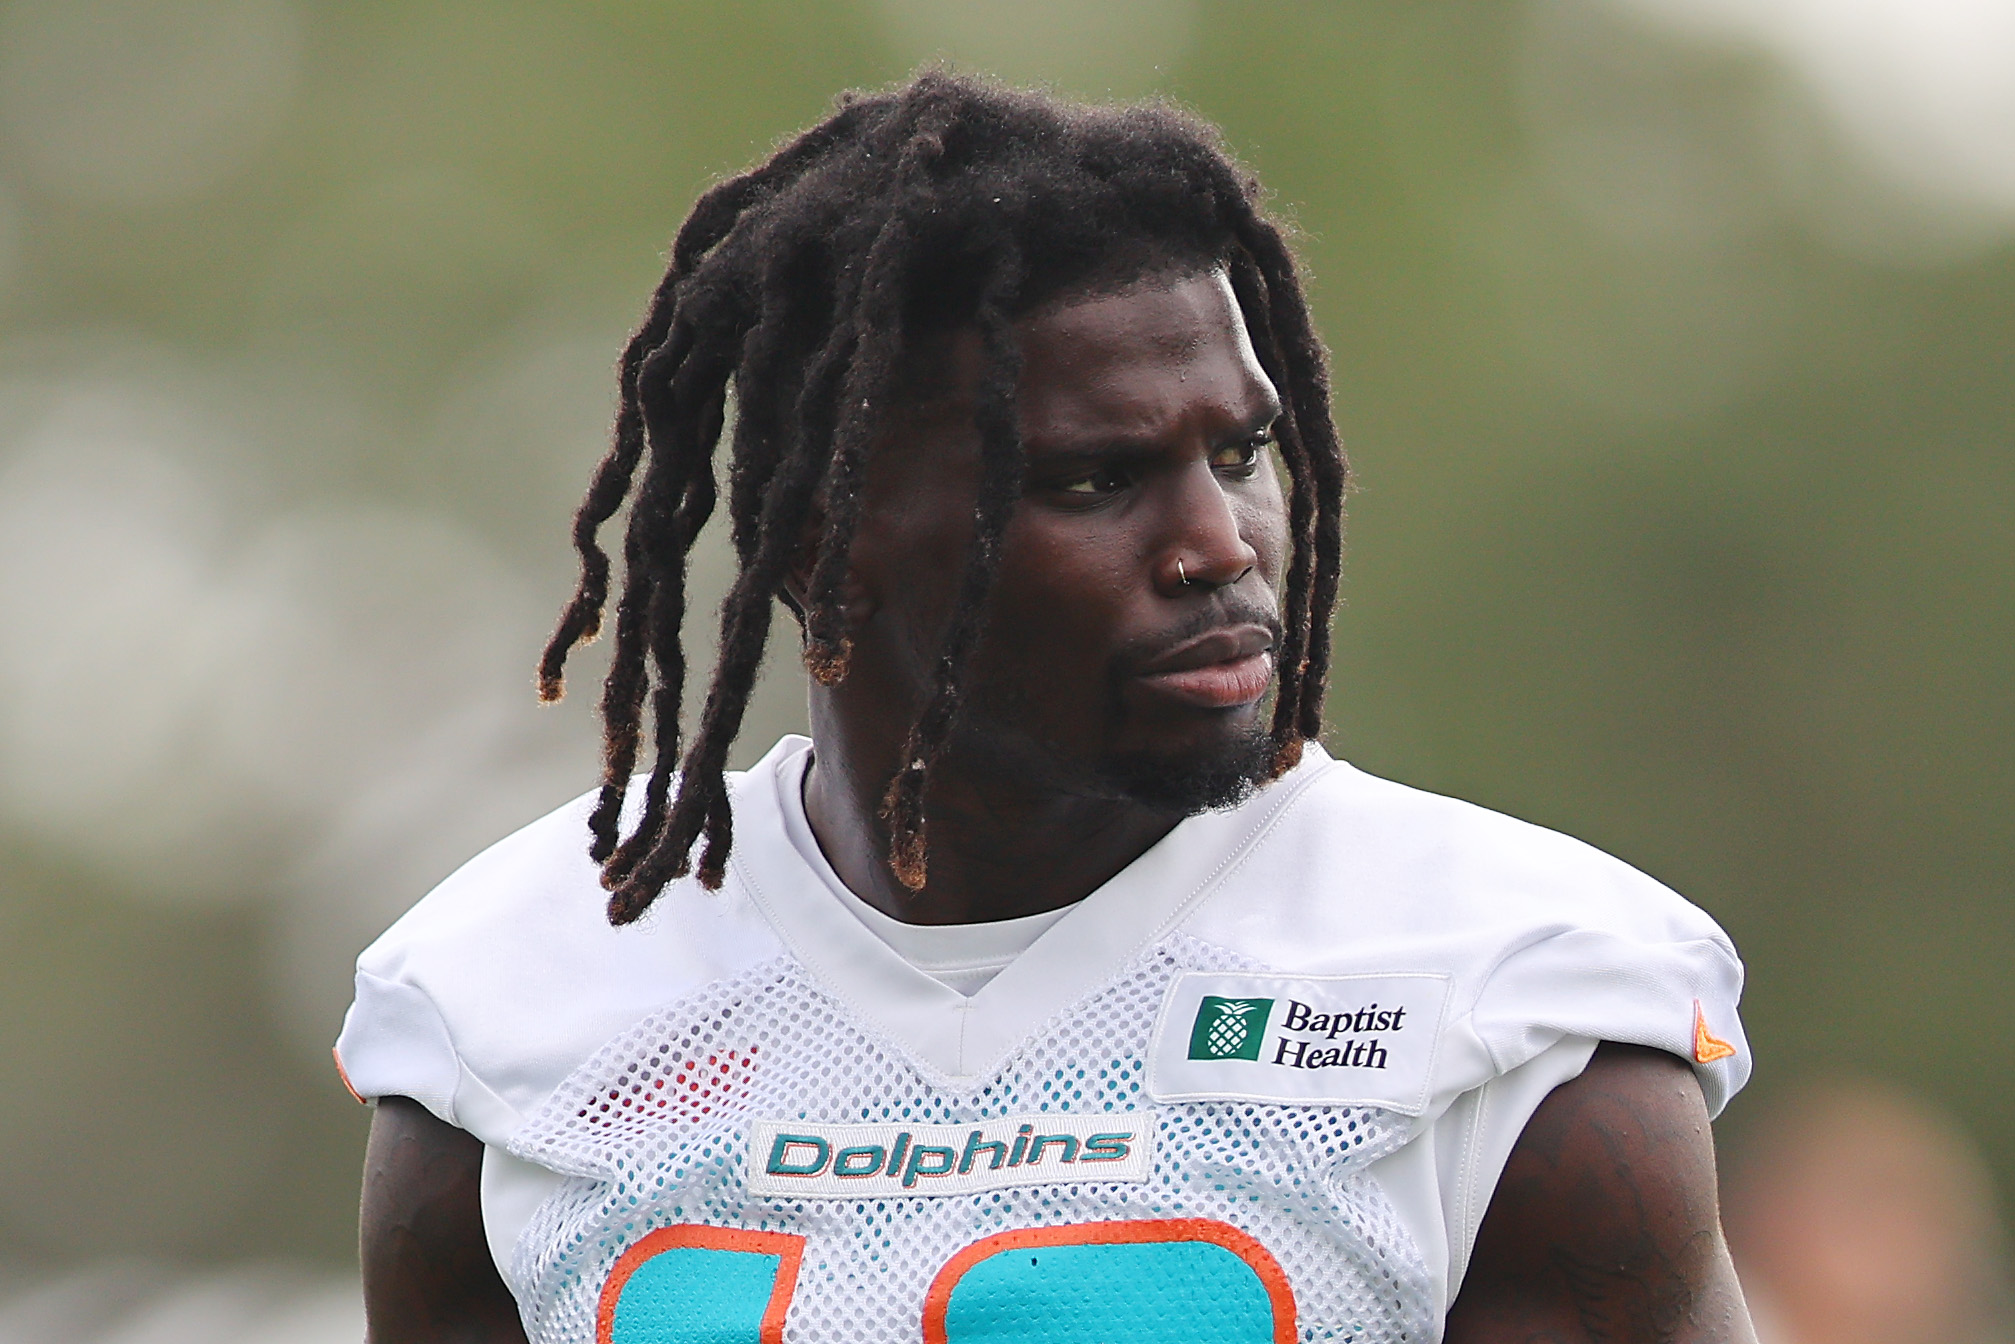 Tyreek Hill of the Miami Dolphins at the Baptist Health Training Complex in 2022, in Miami Gardens, Florida. | Source: Getty Images